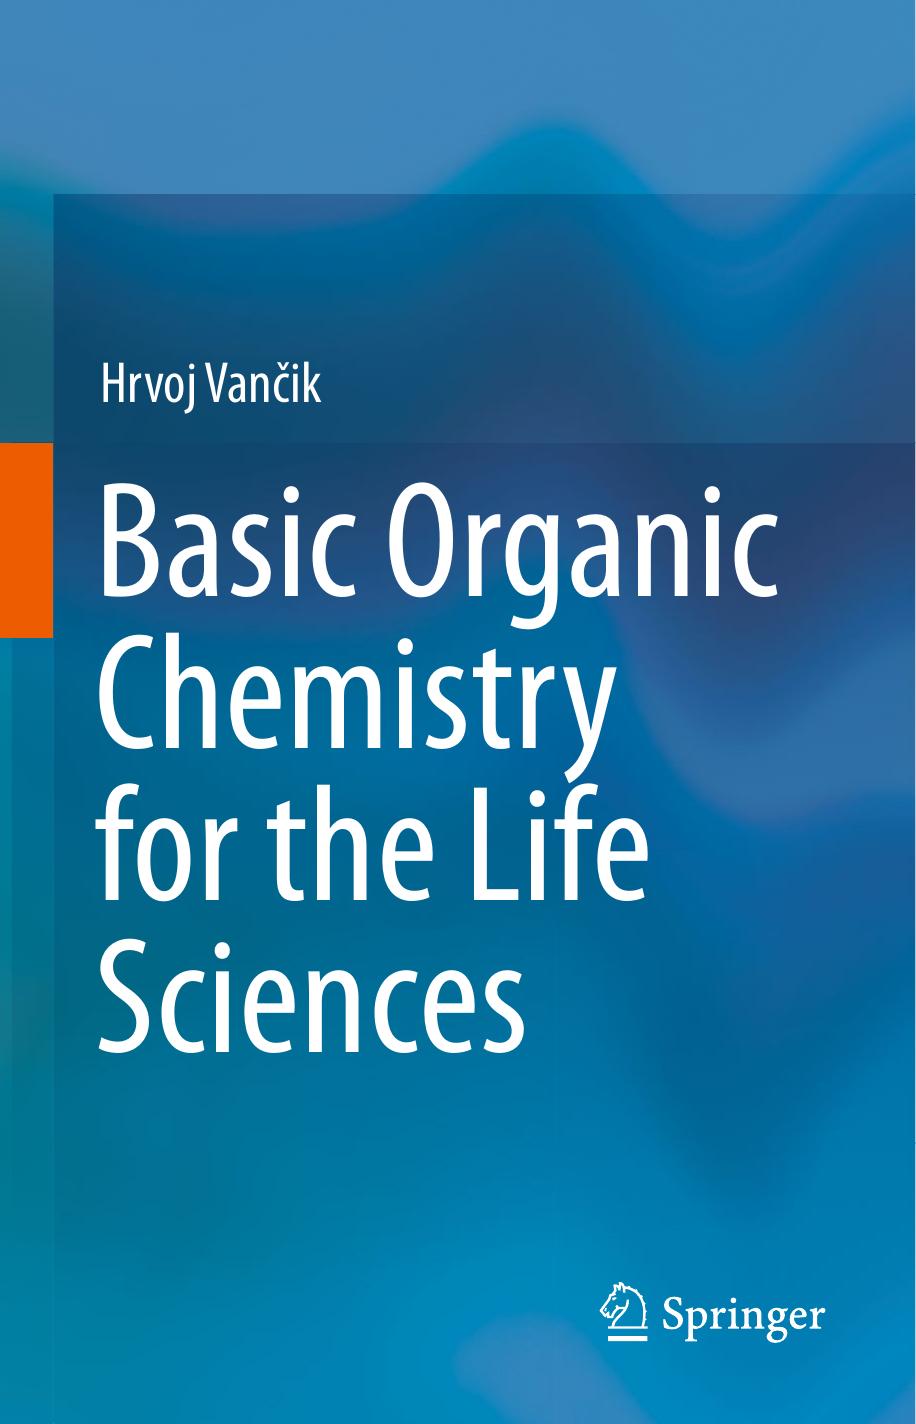 Basic Organic Chemistry for the Life Sciences 2014